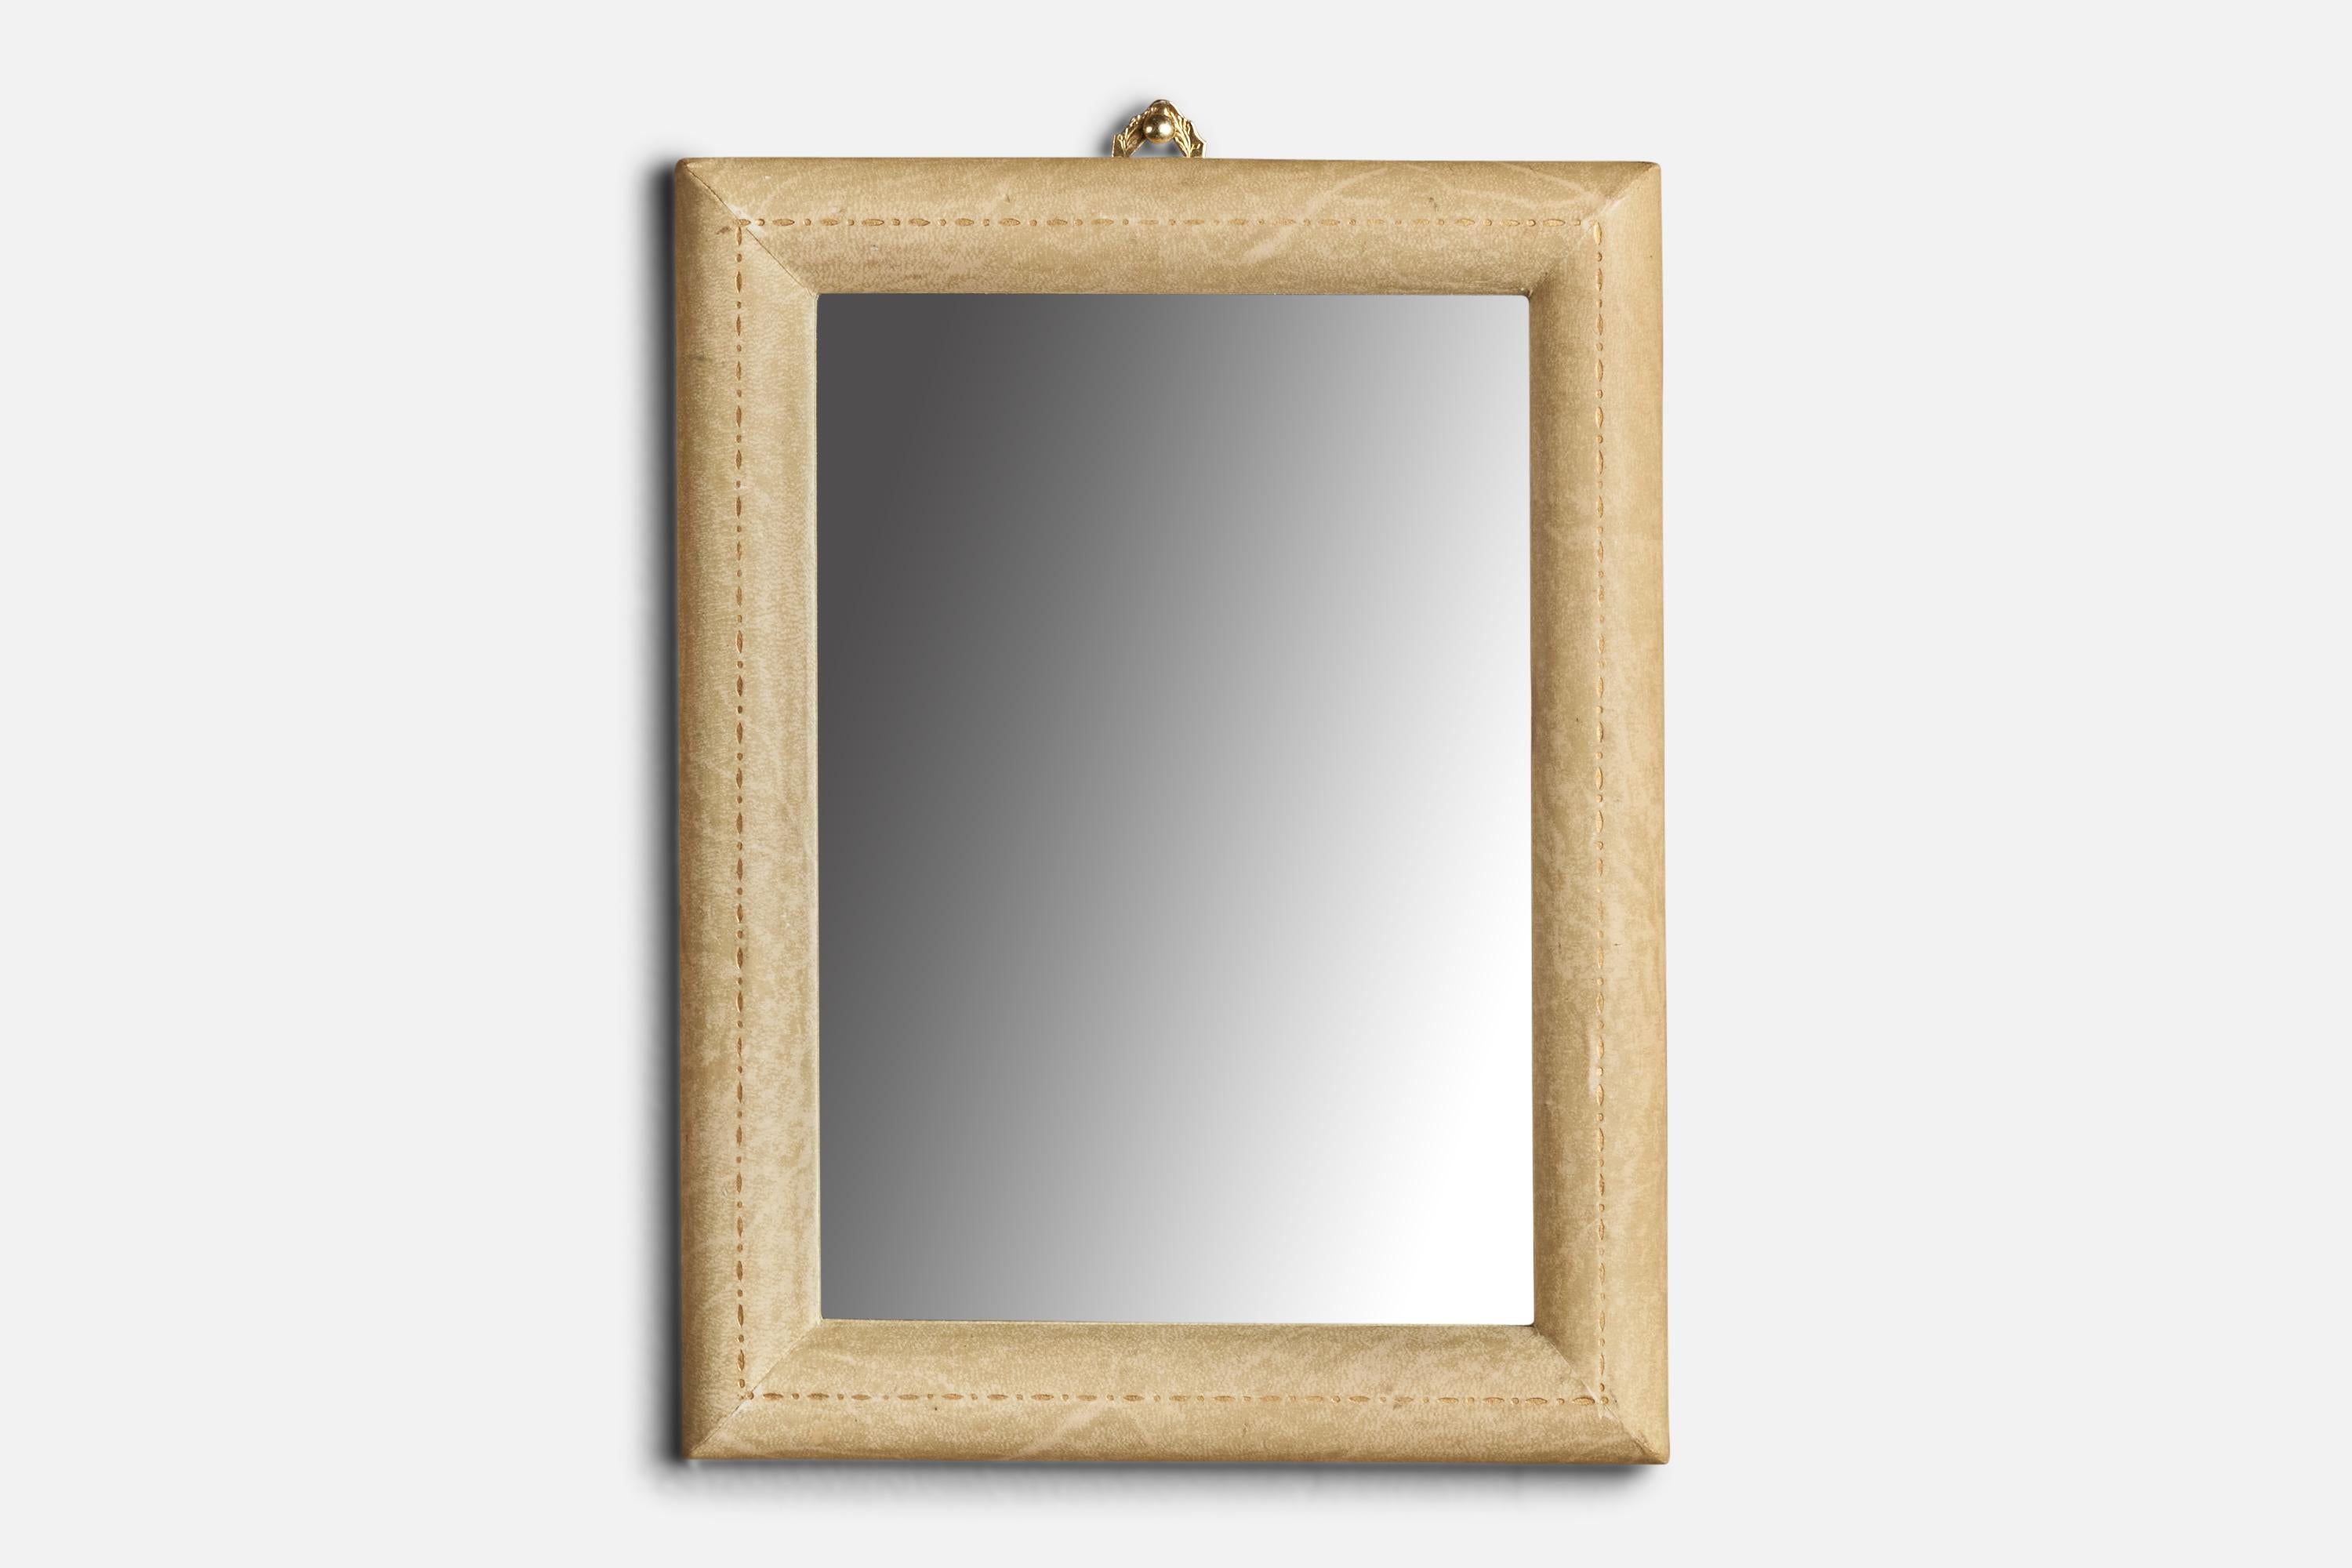 A parchment paper over wood wall mirror designed and produced in Italy, 1940s.